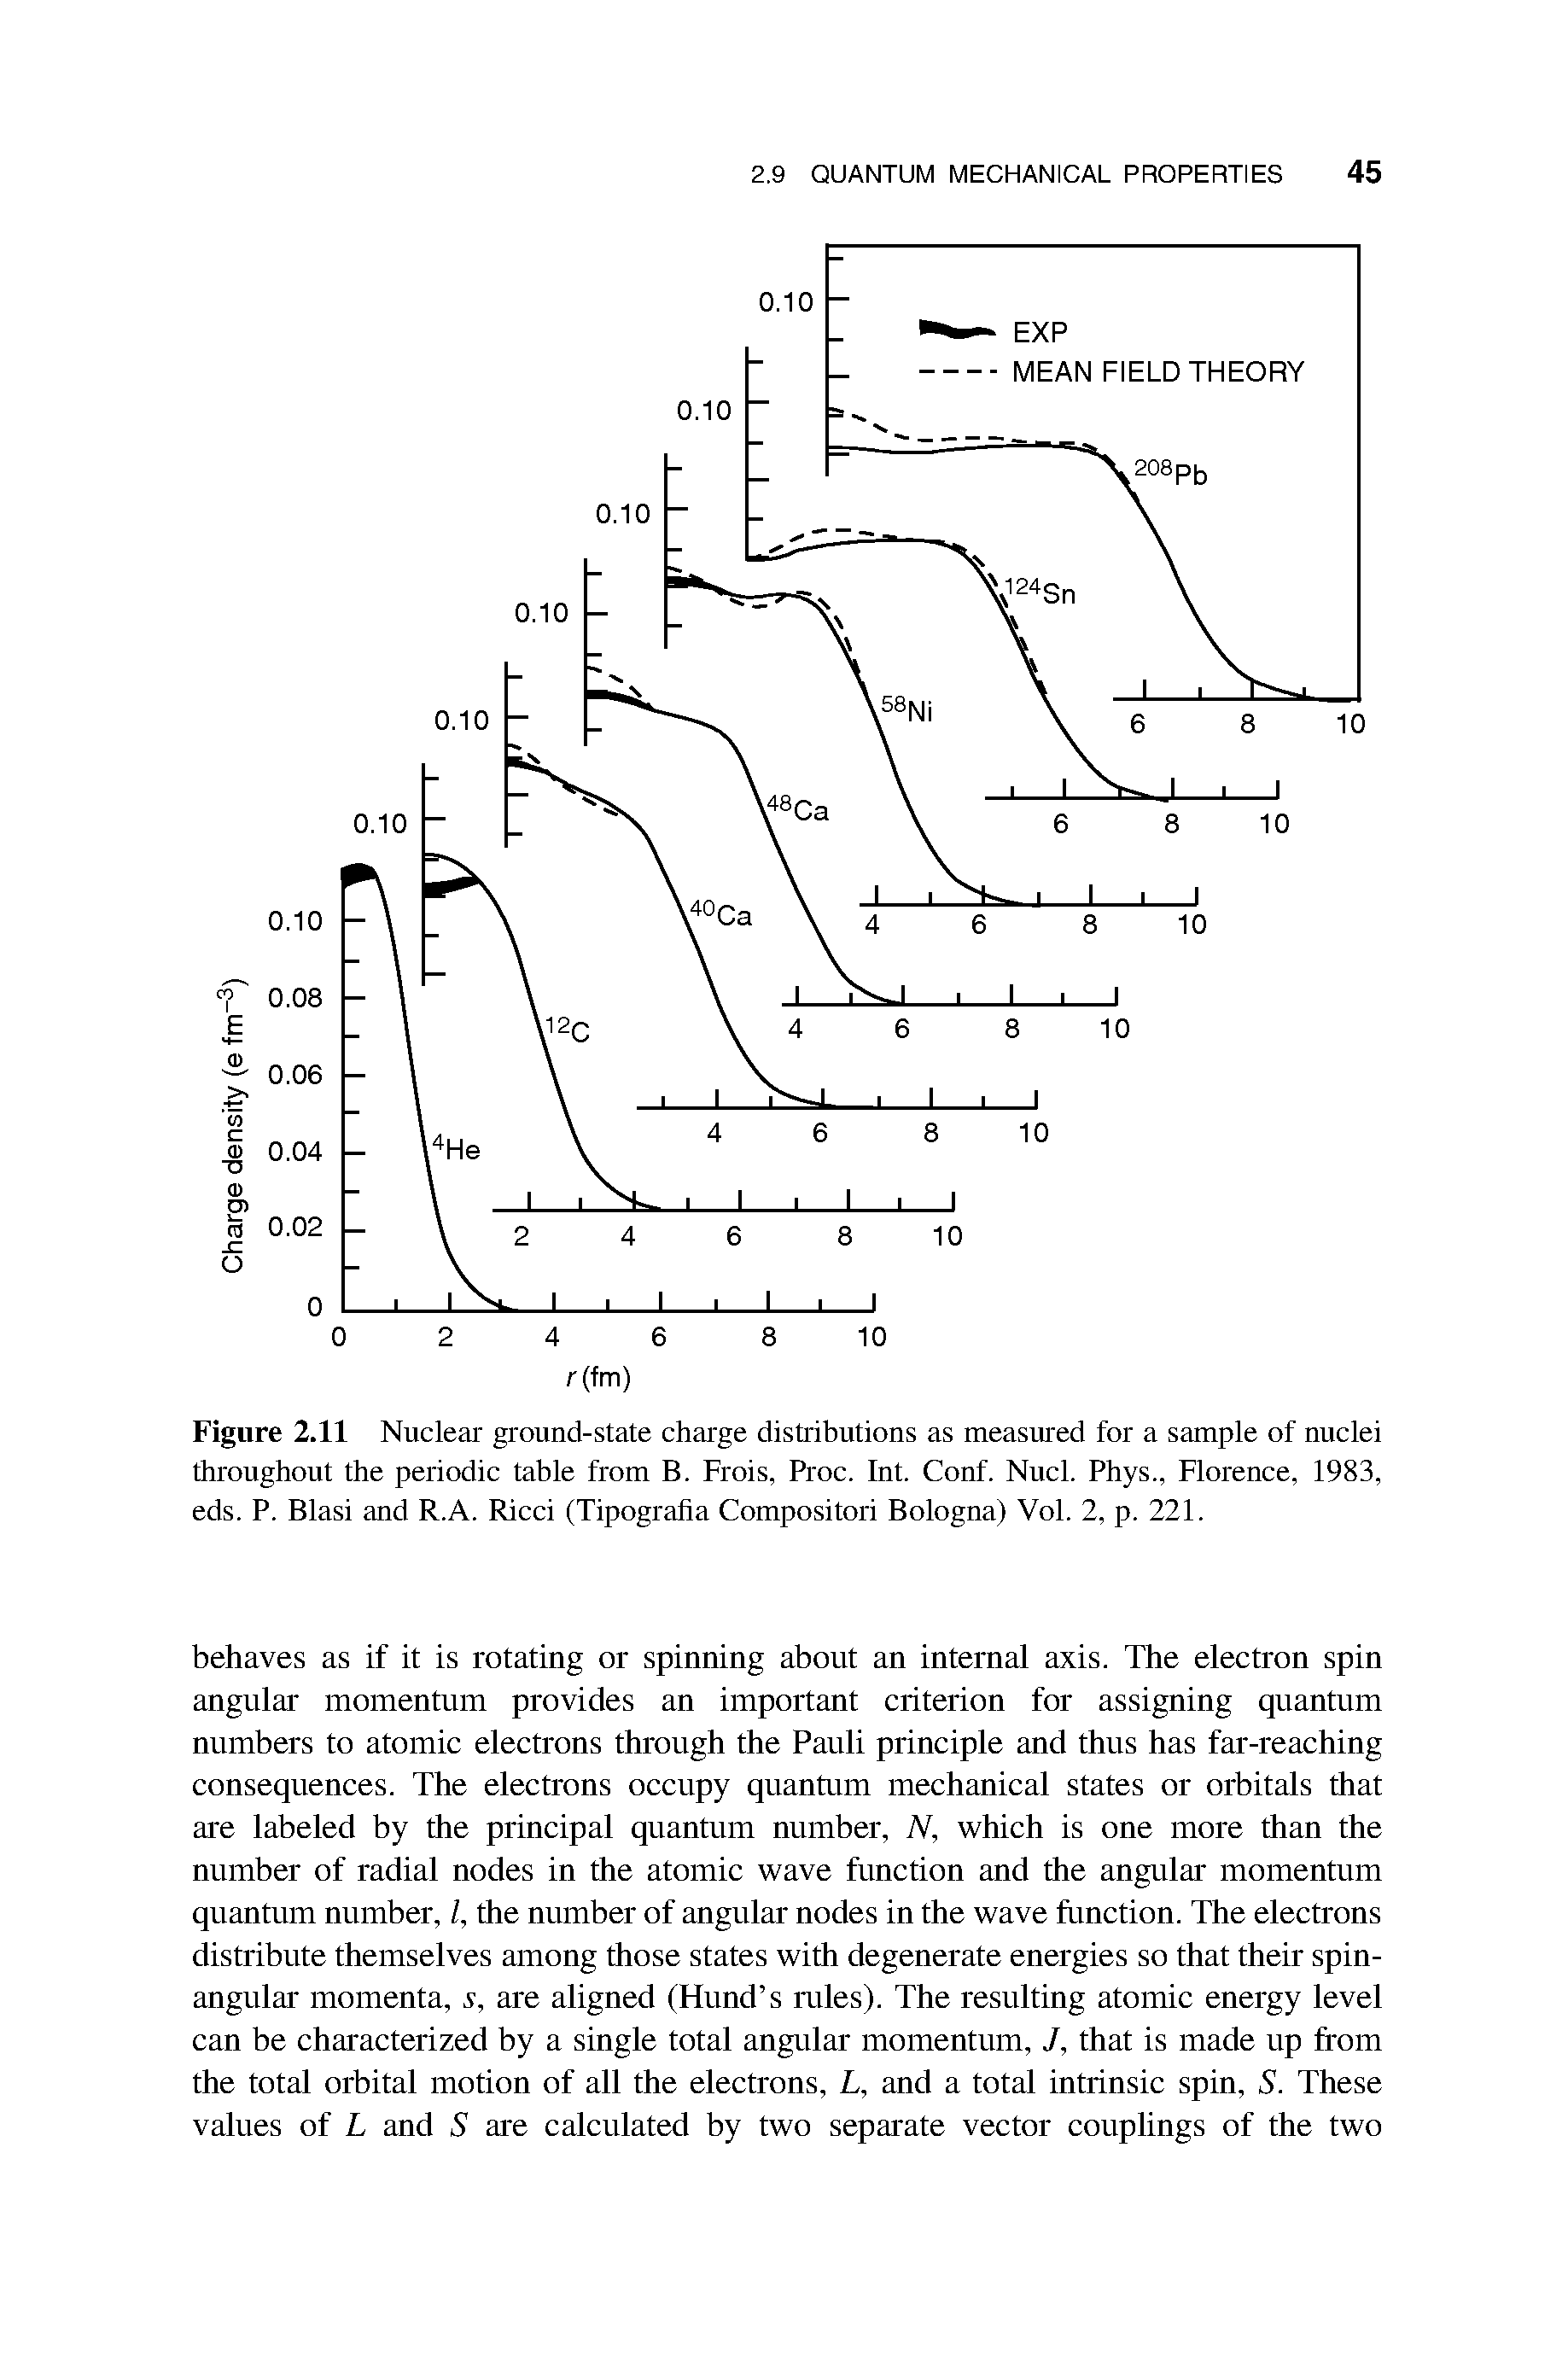 Figure 2.11 Nuclear ground-state charge distributions as measured for a sample of nuclei throughout the periodic table from B. Frois, Proc. Int. Conf. Nucl. Phys., Florence, 1983, eds. P. Blasi and R.A. Ricci (Tipograha Compositori Bologna) Vol. 2, p. 221.